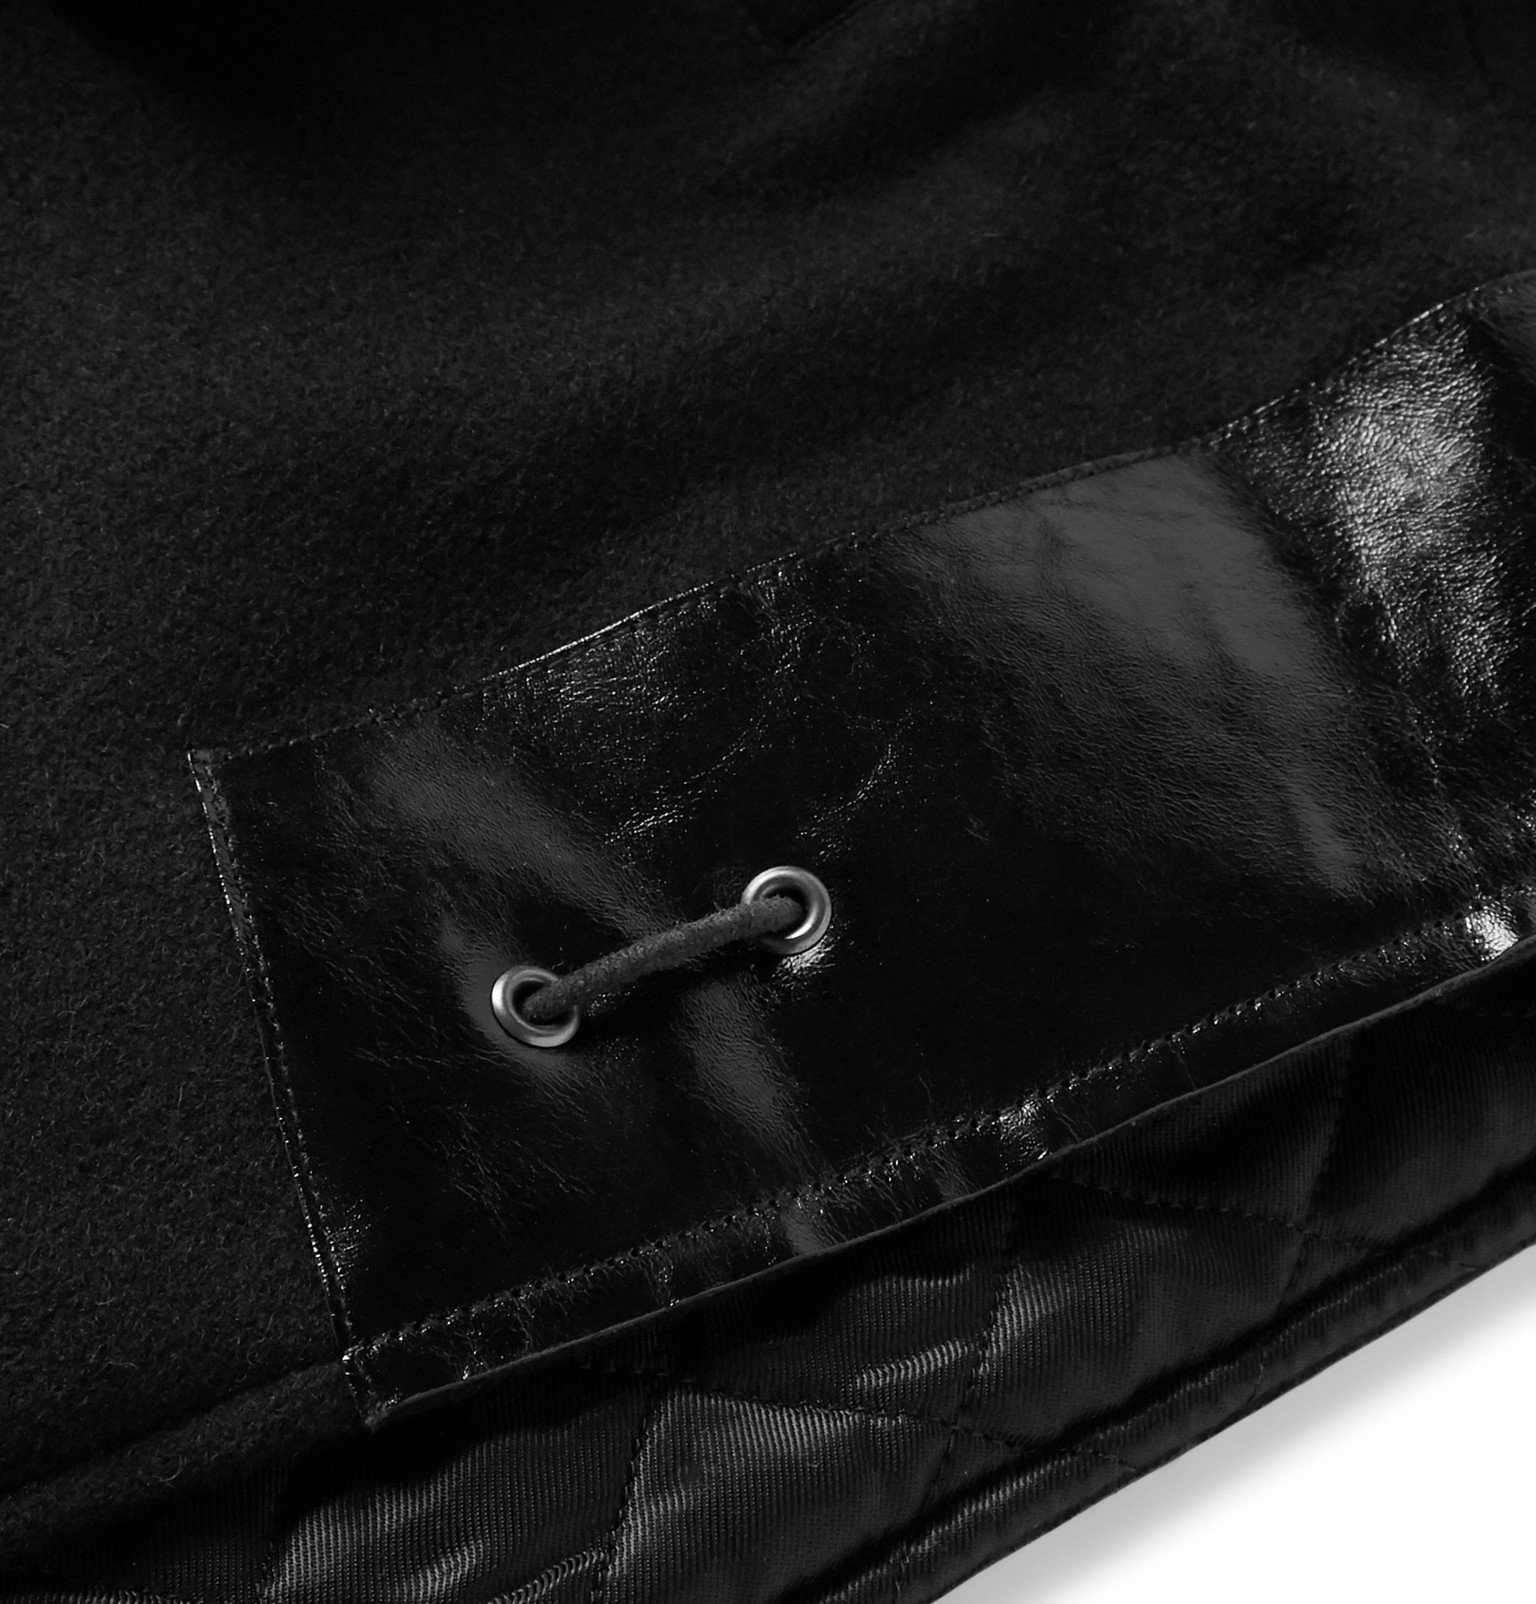 Our Legacy - Patent Leather-Trimmed Virgin Wool Jacket - Black Our Legacy